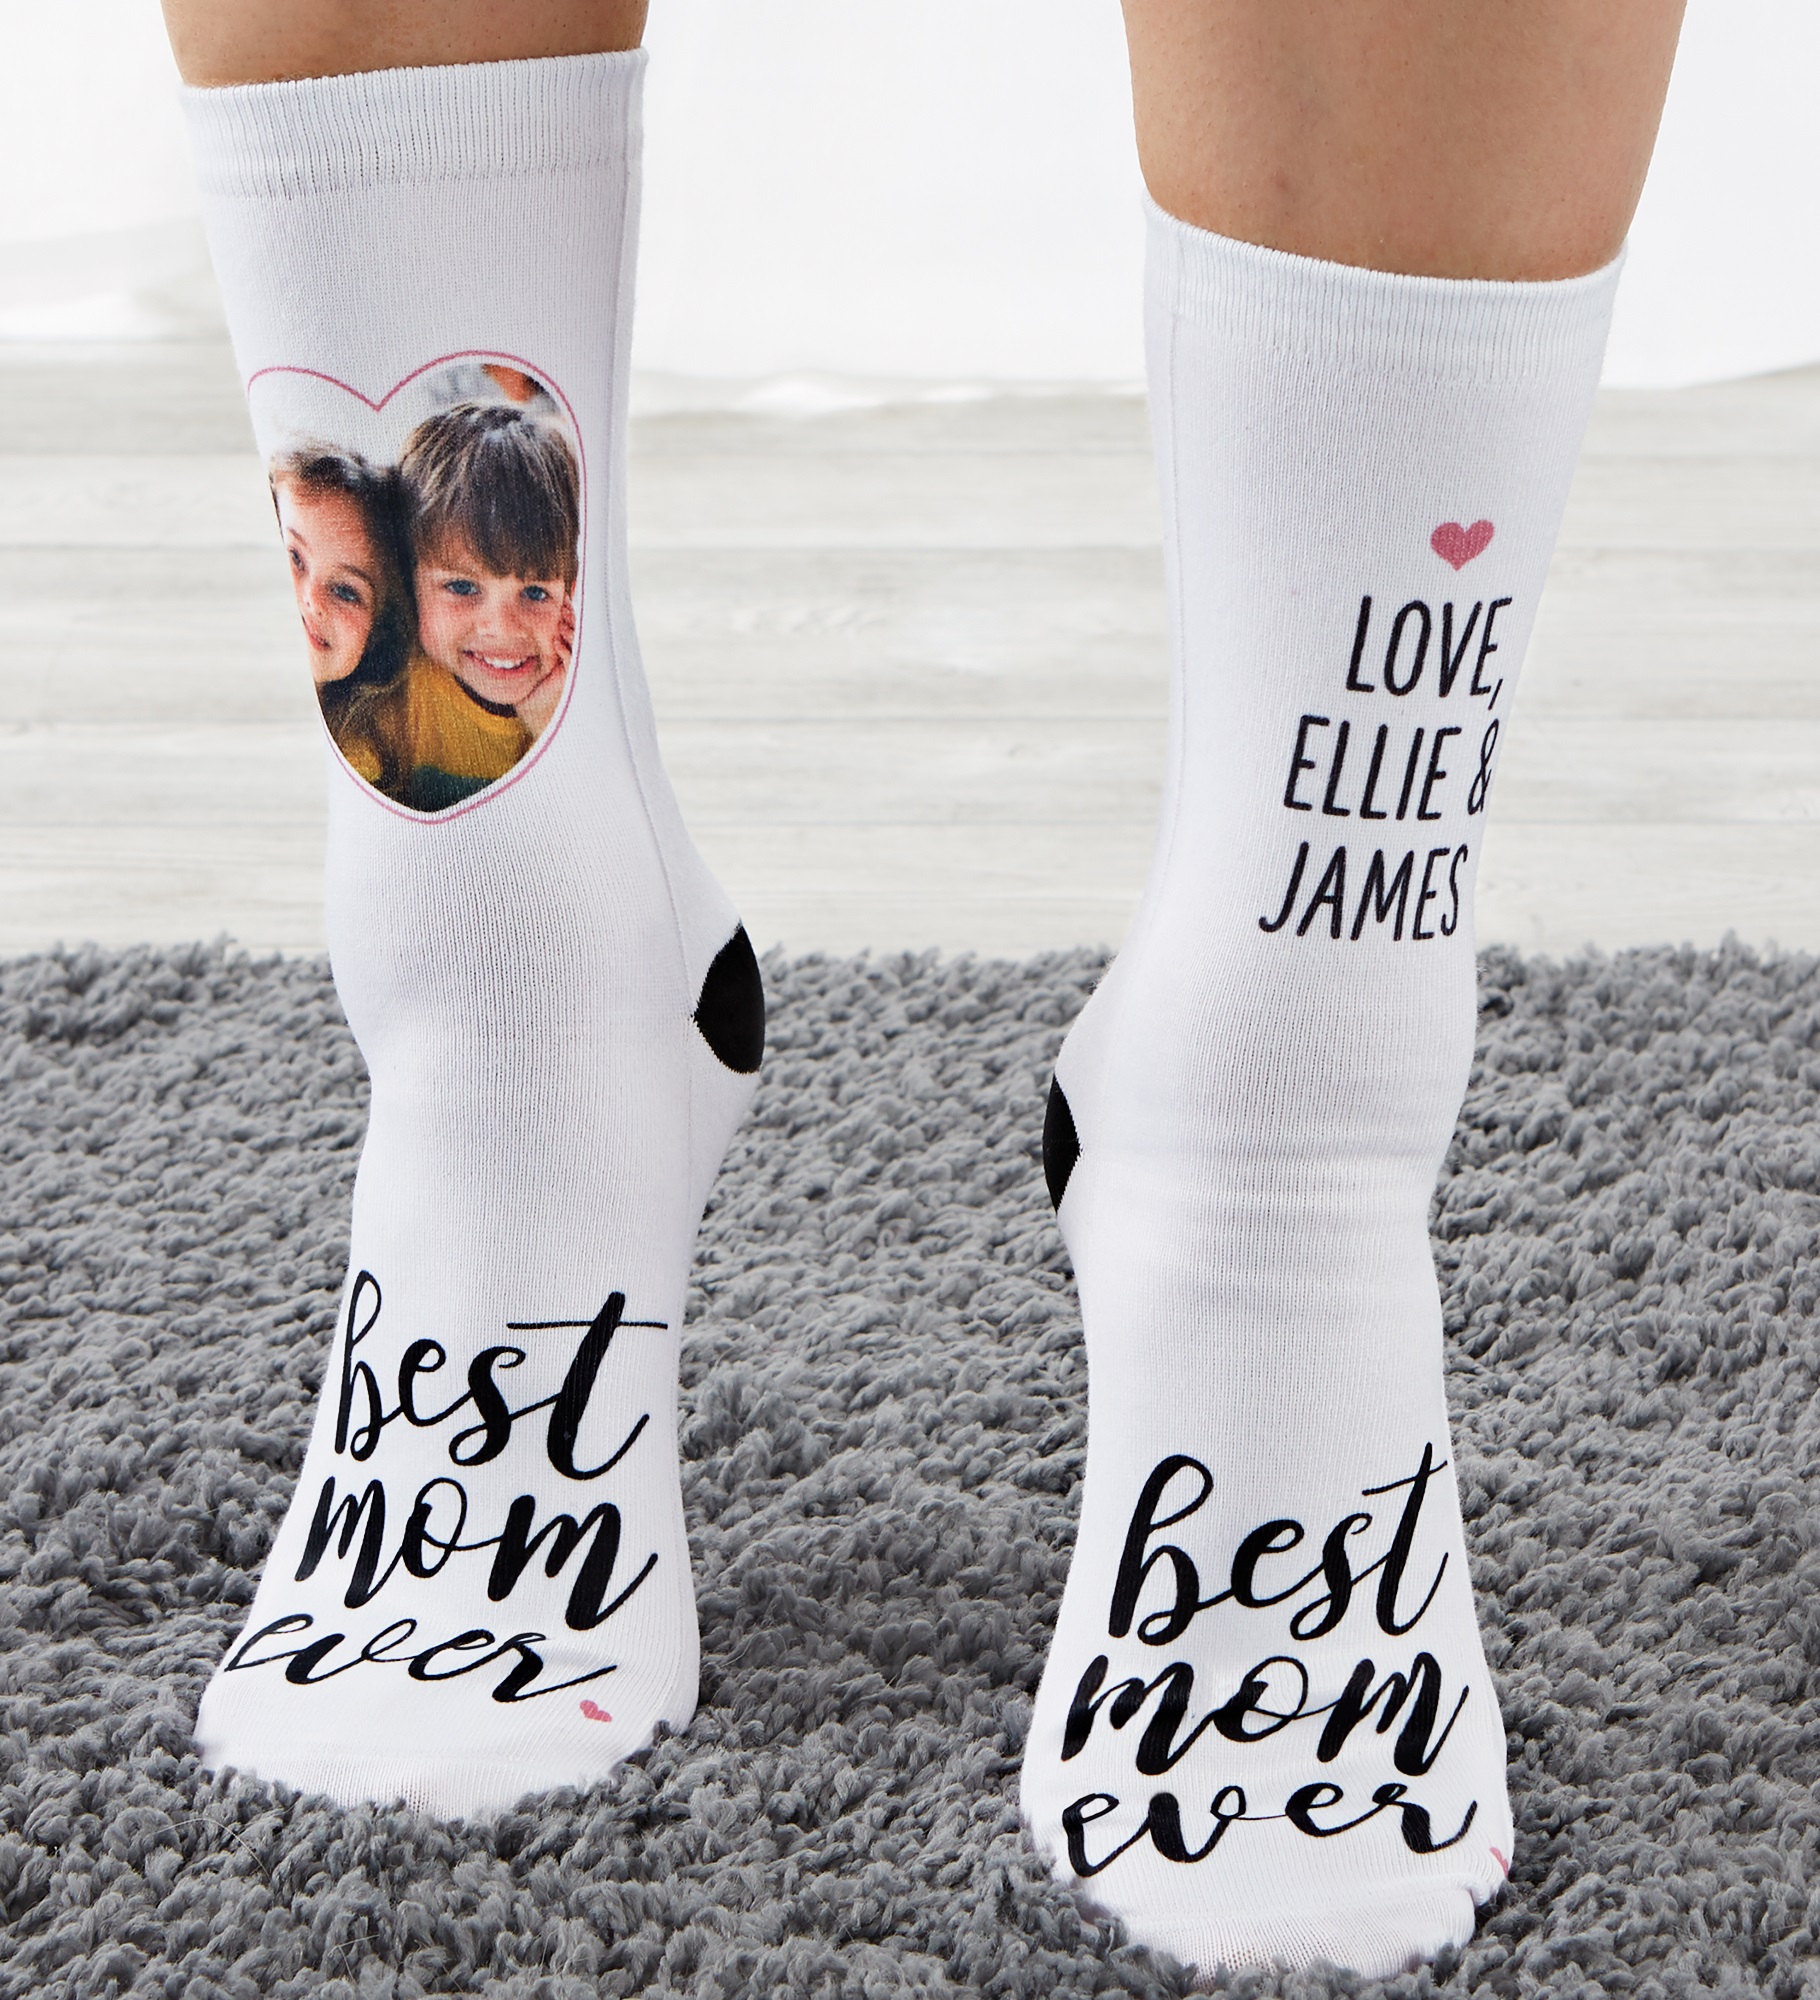 Best Mom Ever Personalized Adult Photo Socks